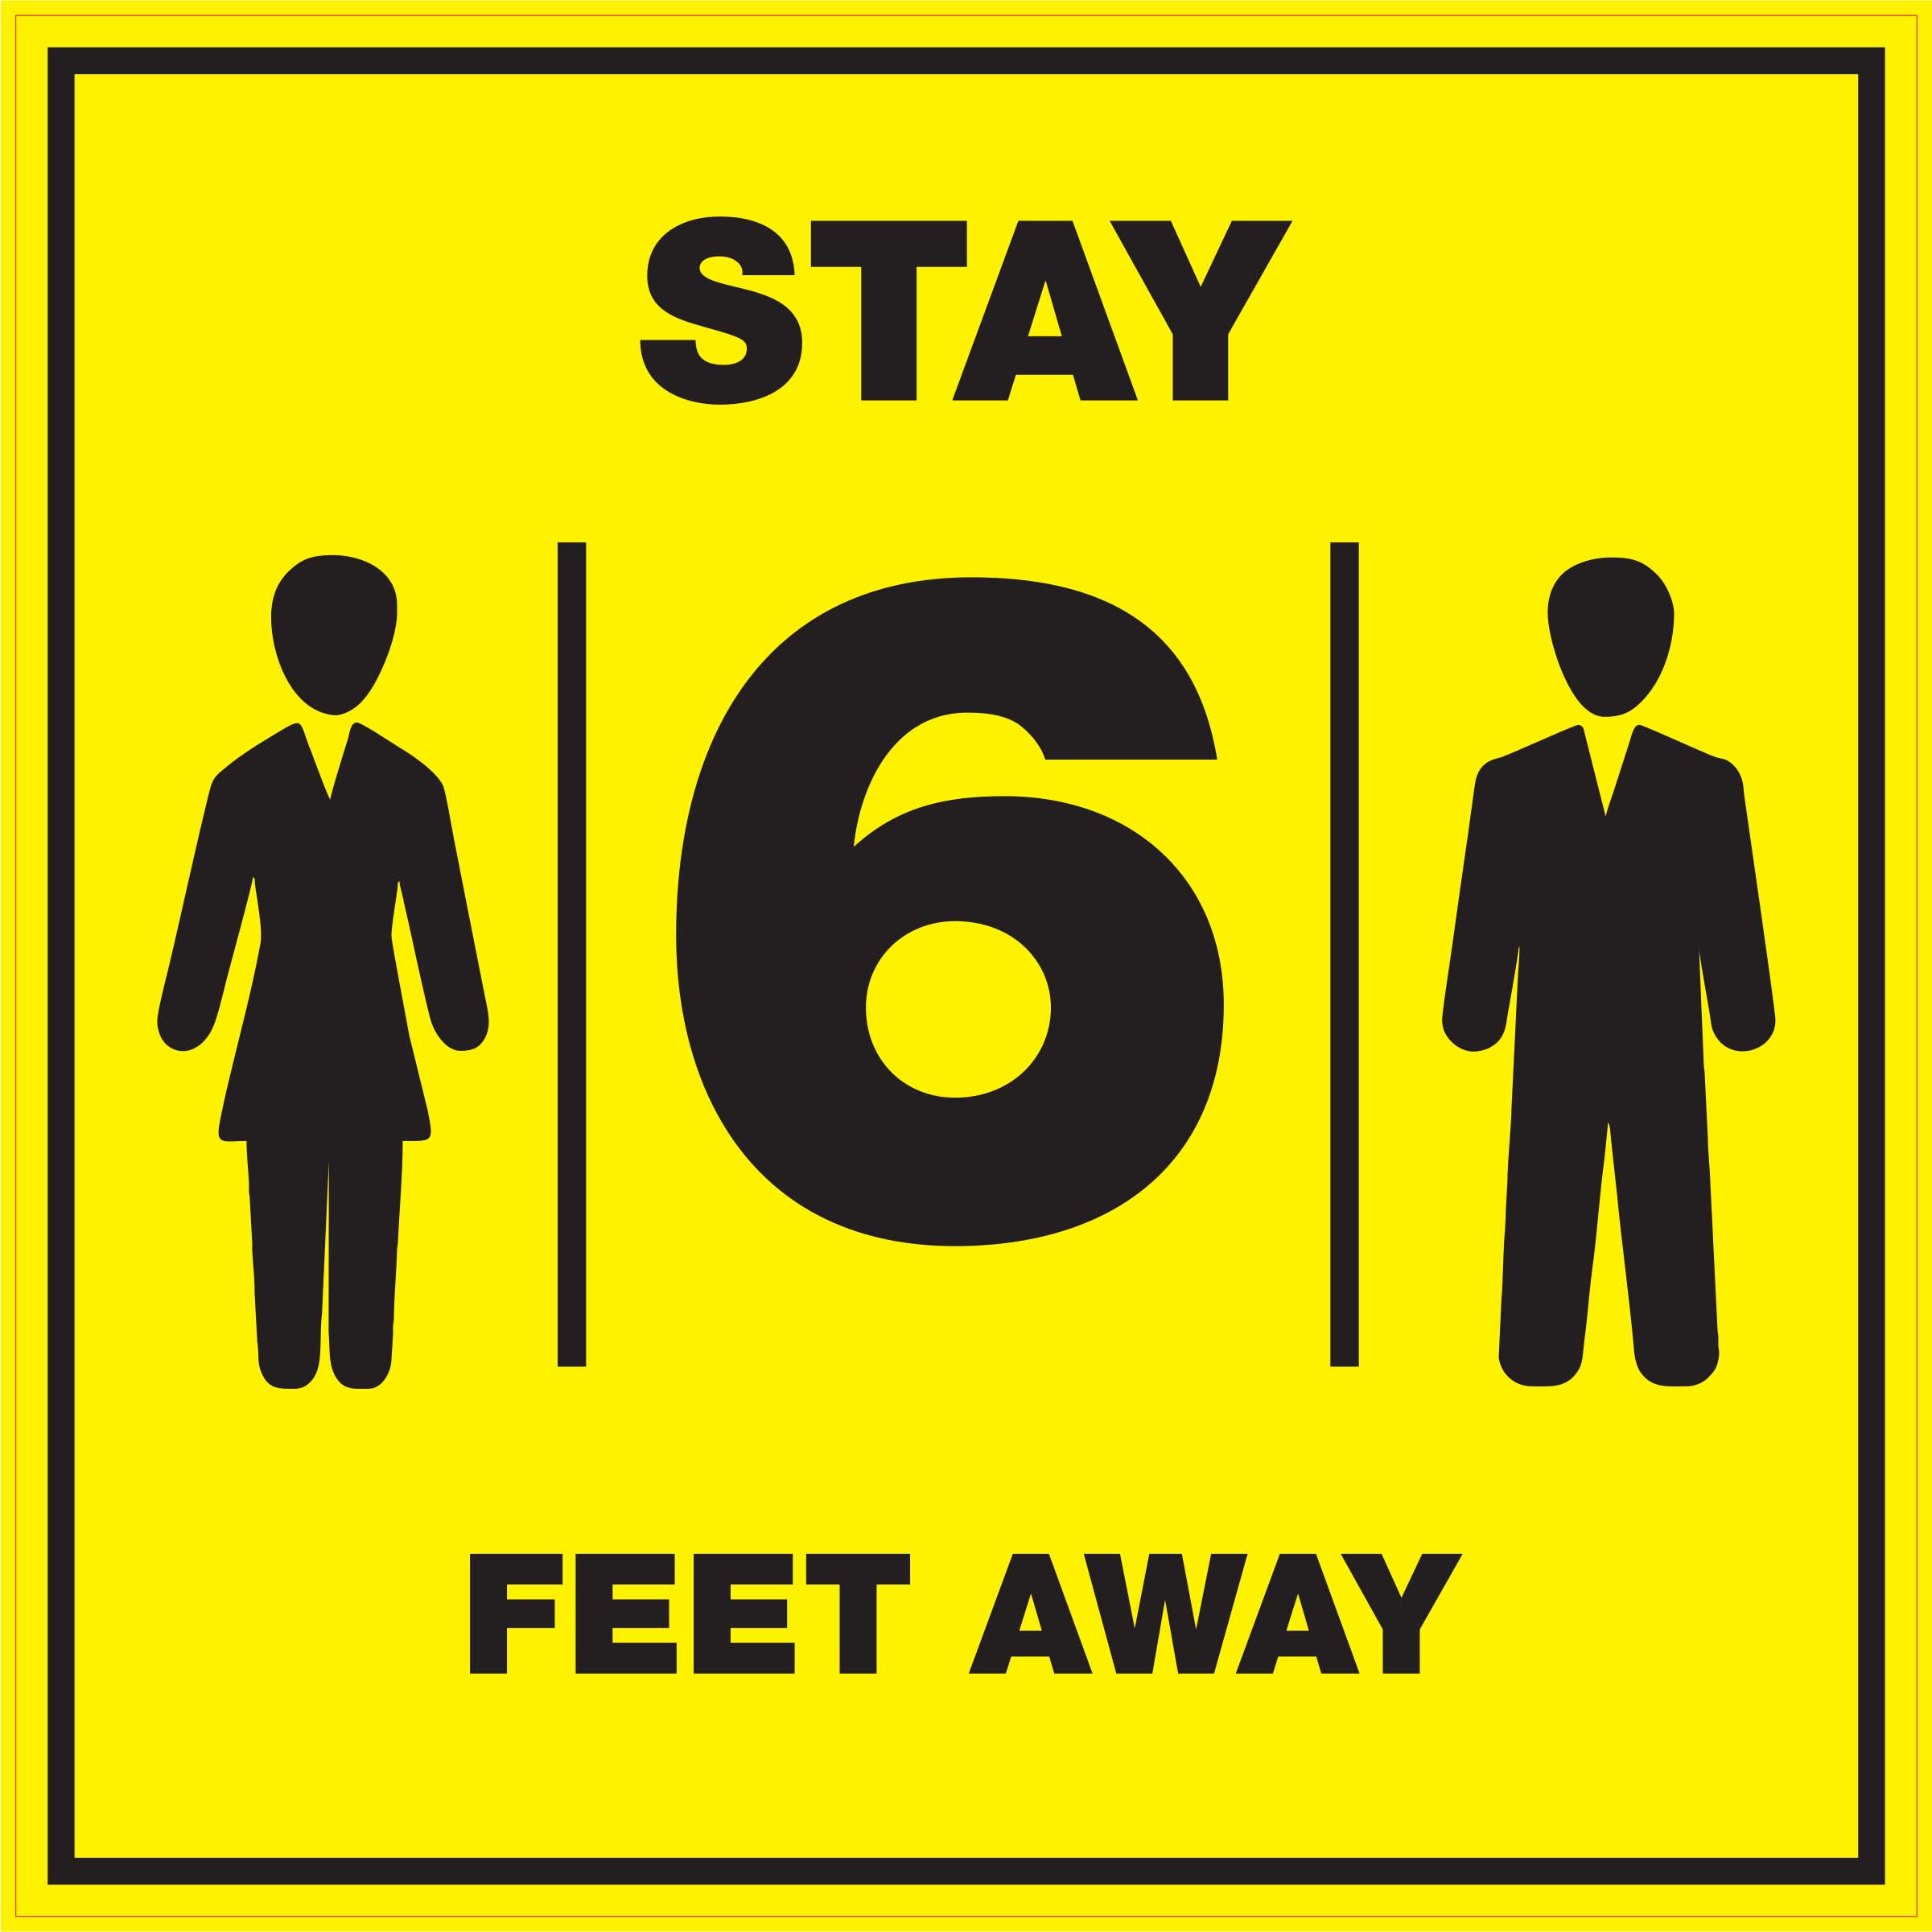 SD - Stay 6 Feet Away 8" x 8" Decal - 6 pack